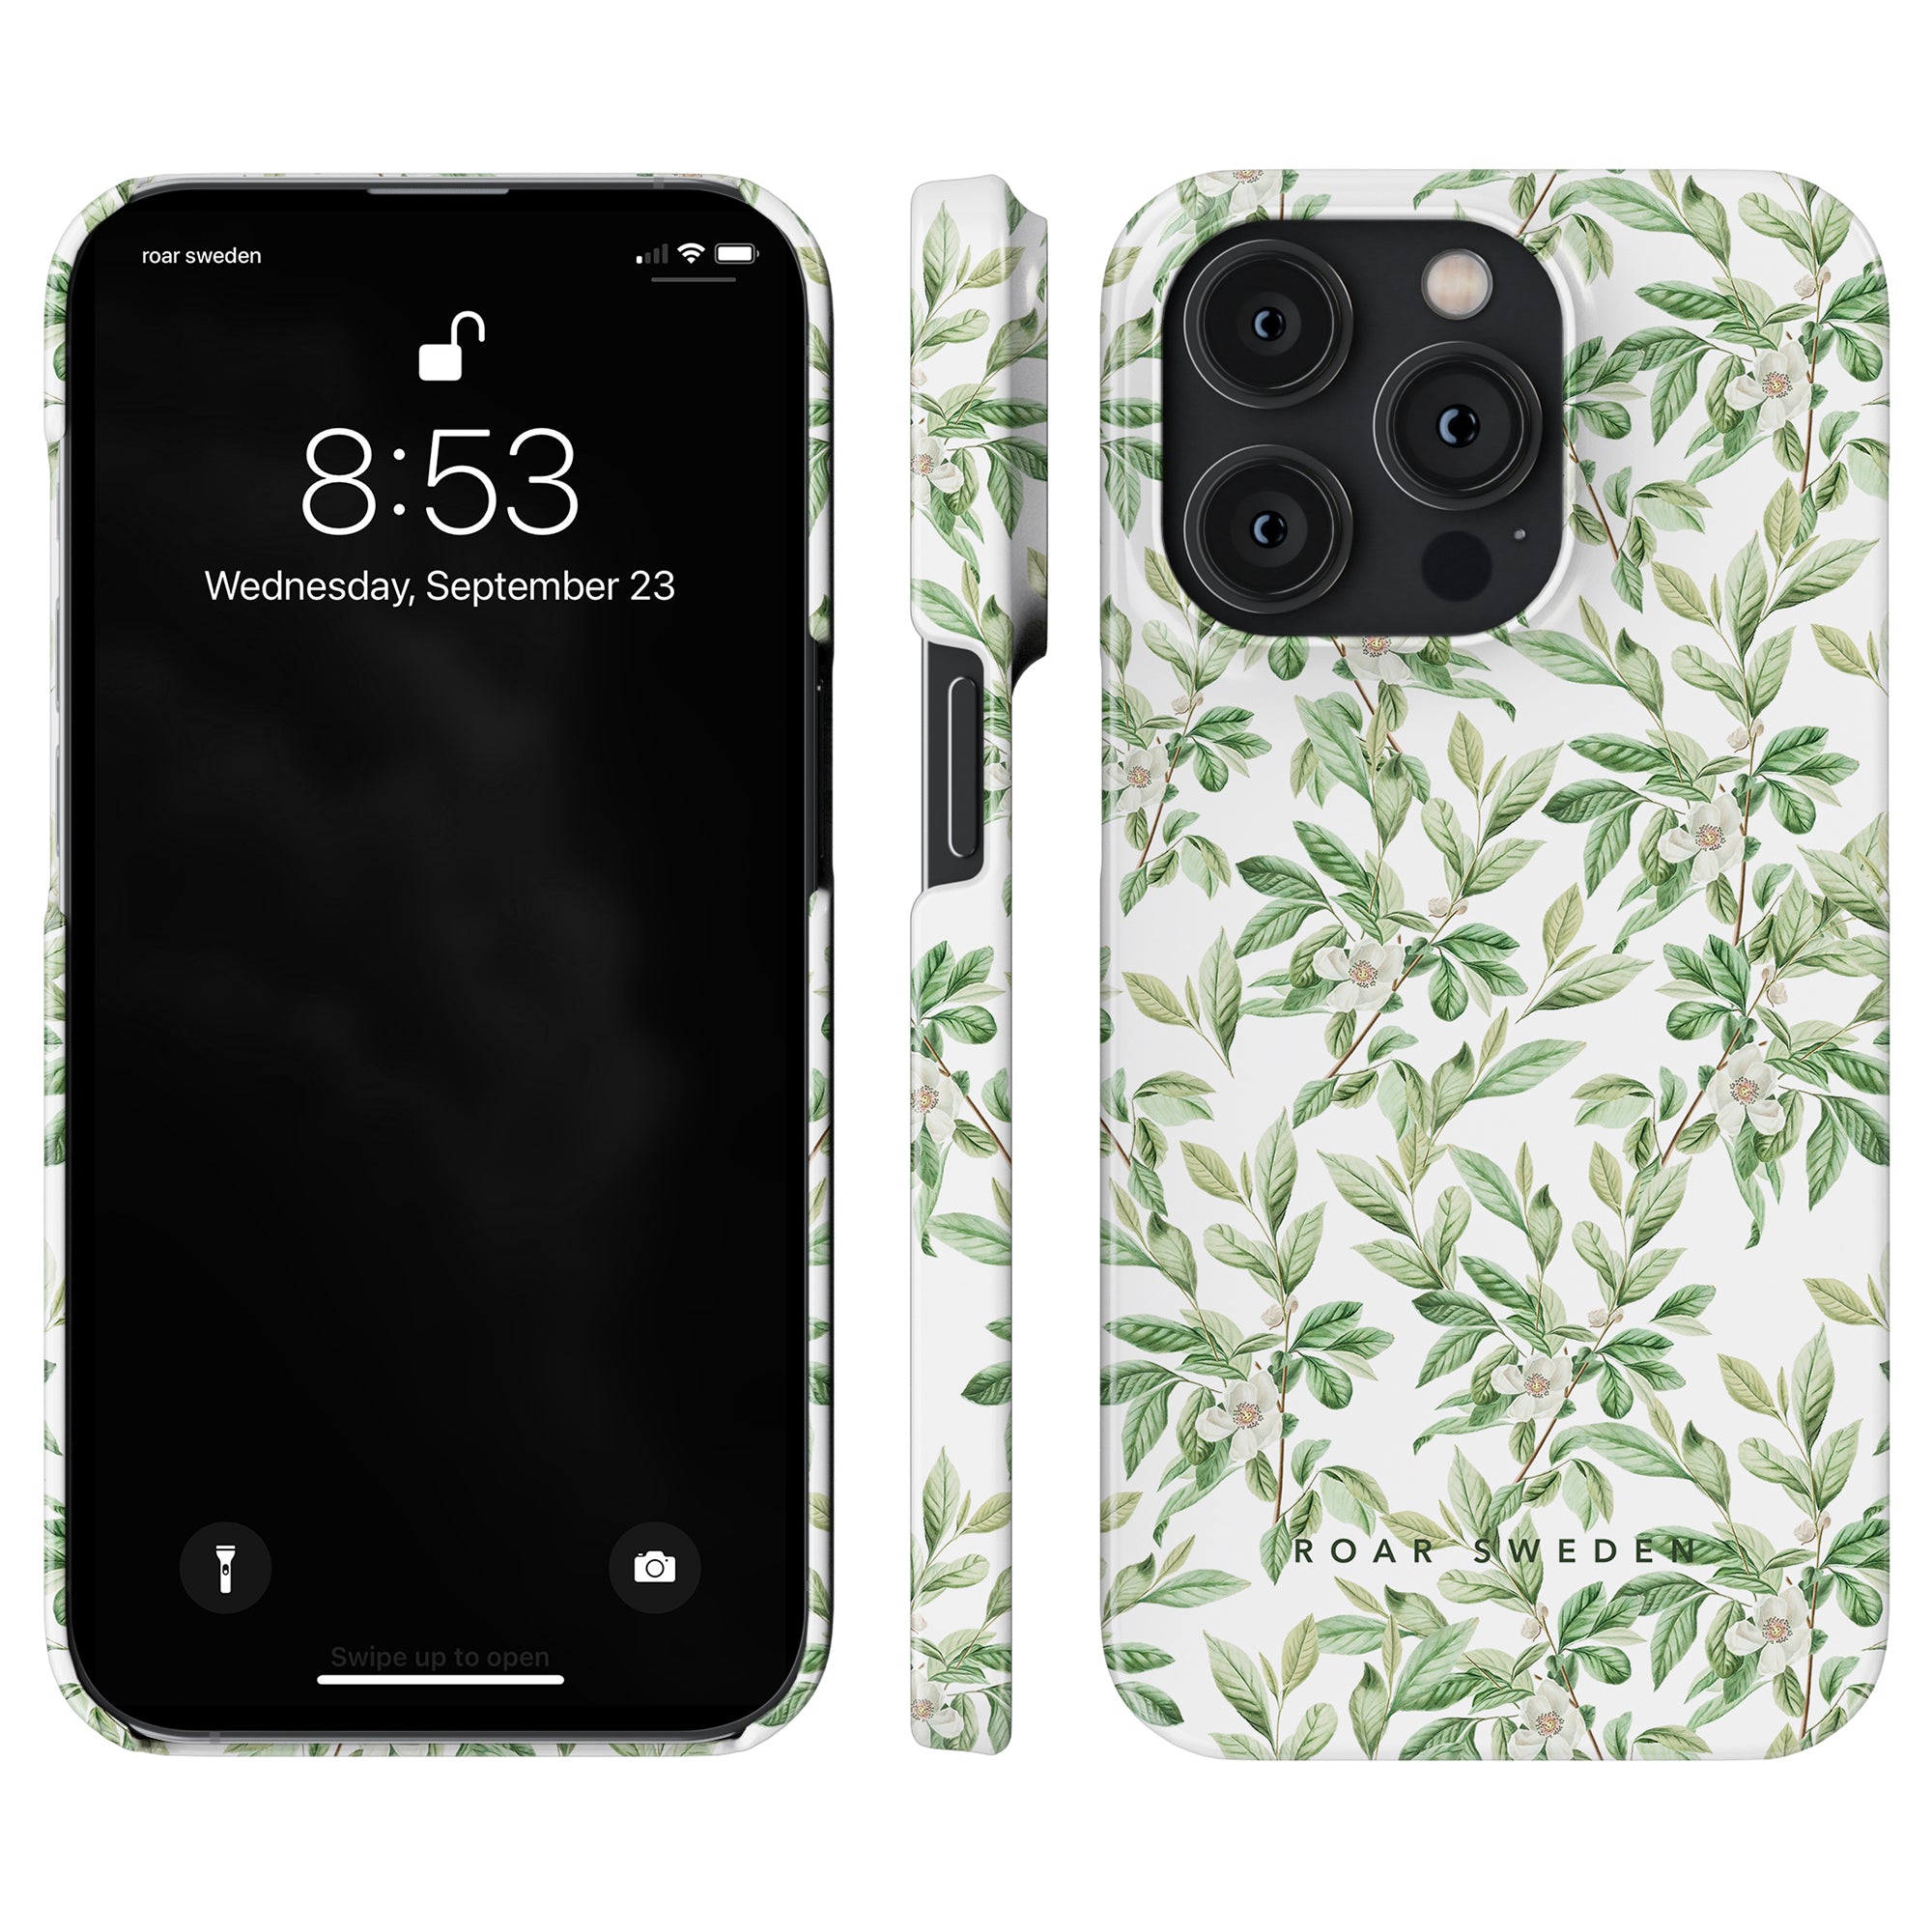 Spring Leaves - Slim case with a green and white botanical pattern, uniquely detailed in the SEO-optimized product description, displayed from the front, side, and back.